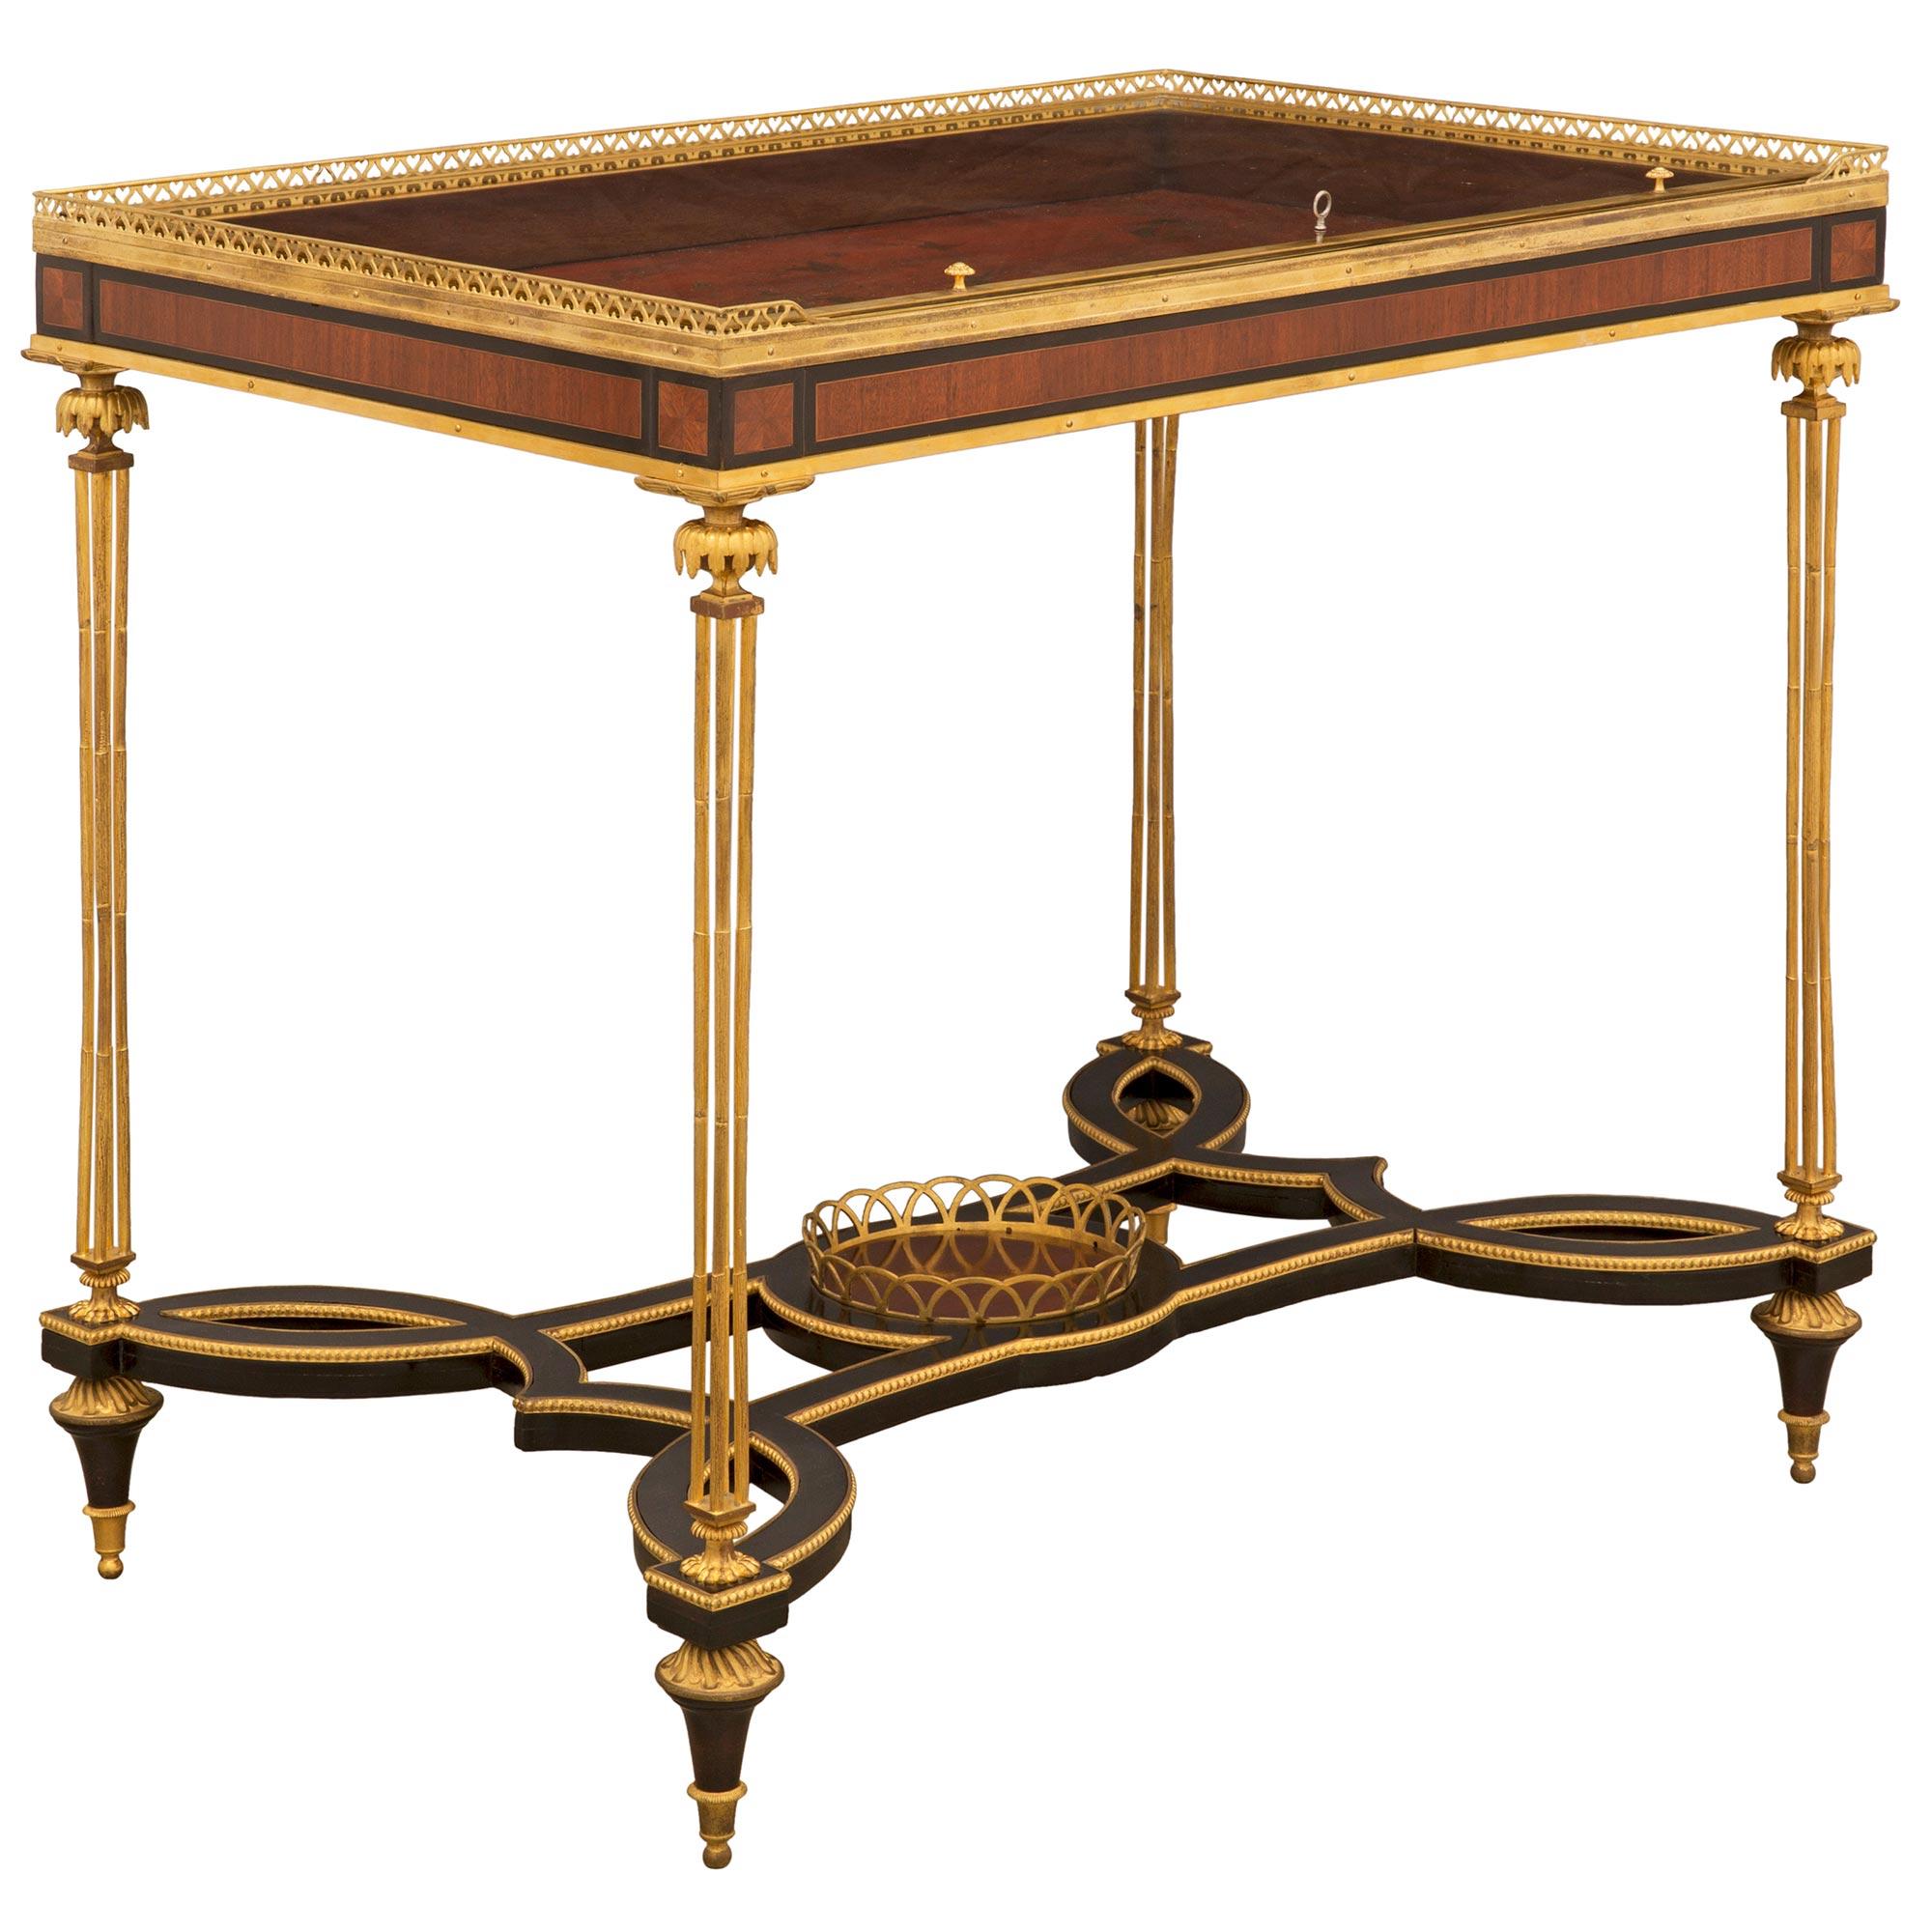 French Mid-19th Century Louis XVI Style Kingwood and Ormolu Display Table In Good Condition For Sale In West Palm Beach, FL